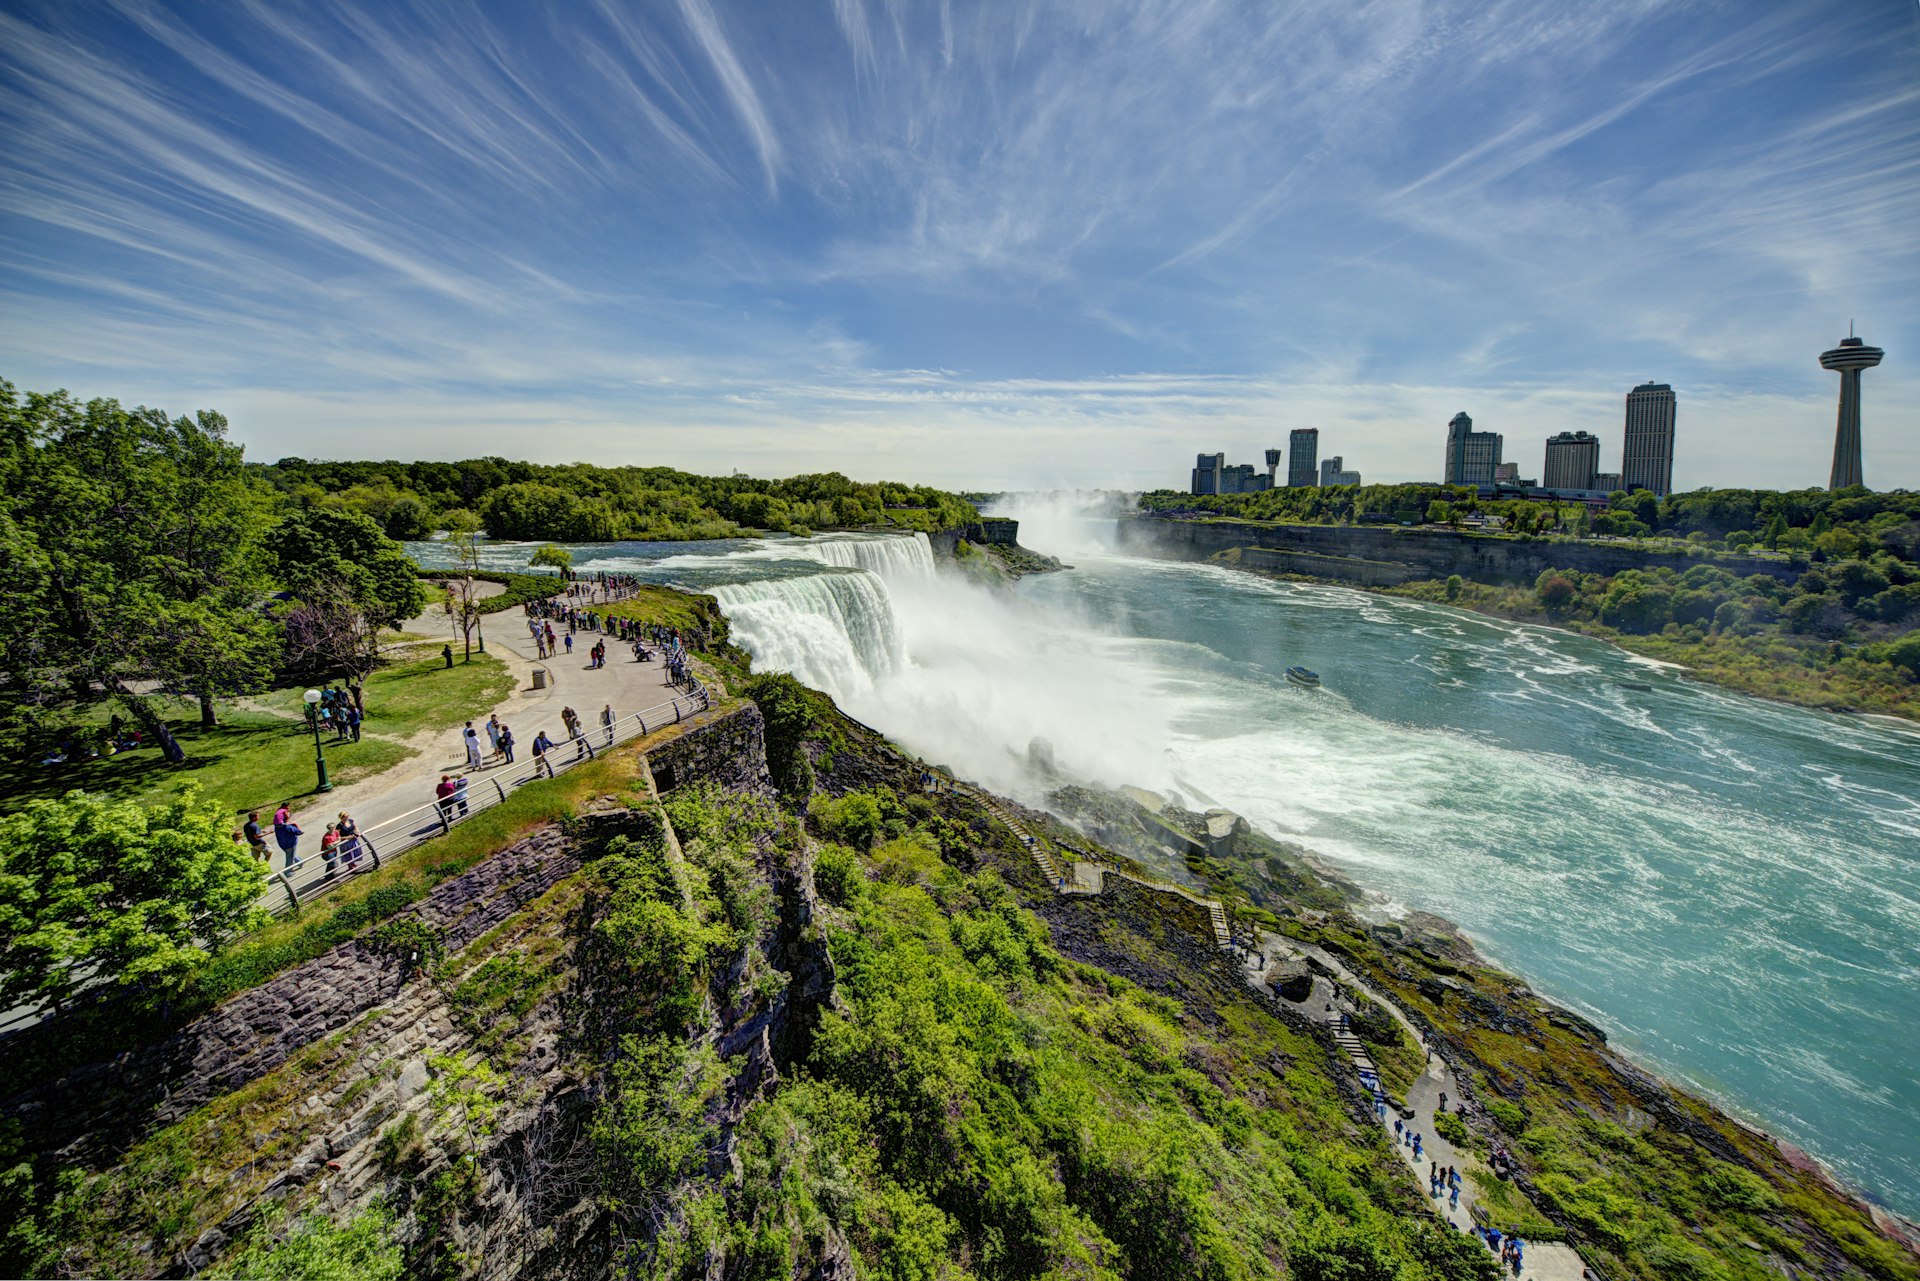 Niagara Falls as seen from New York State